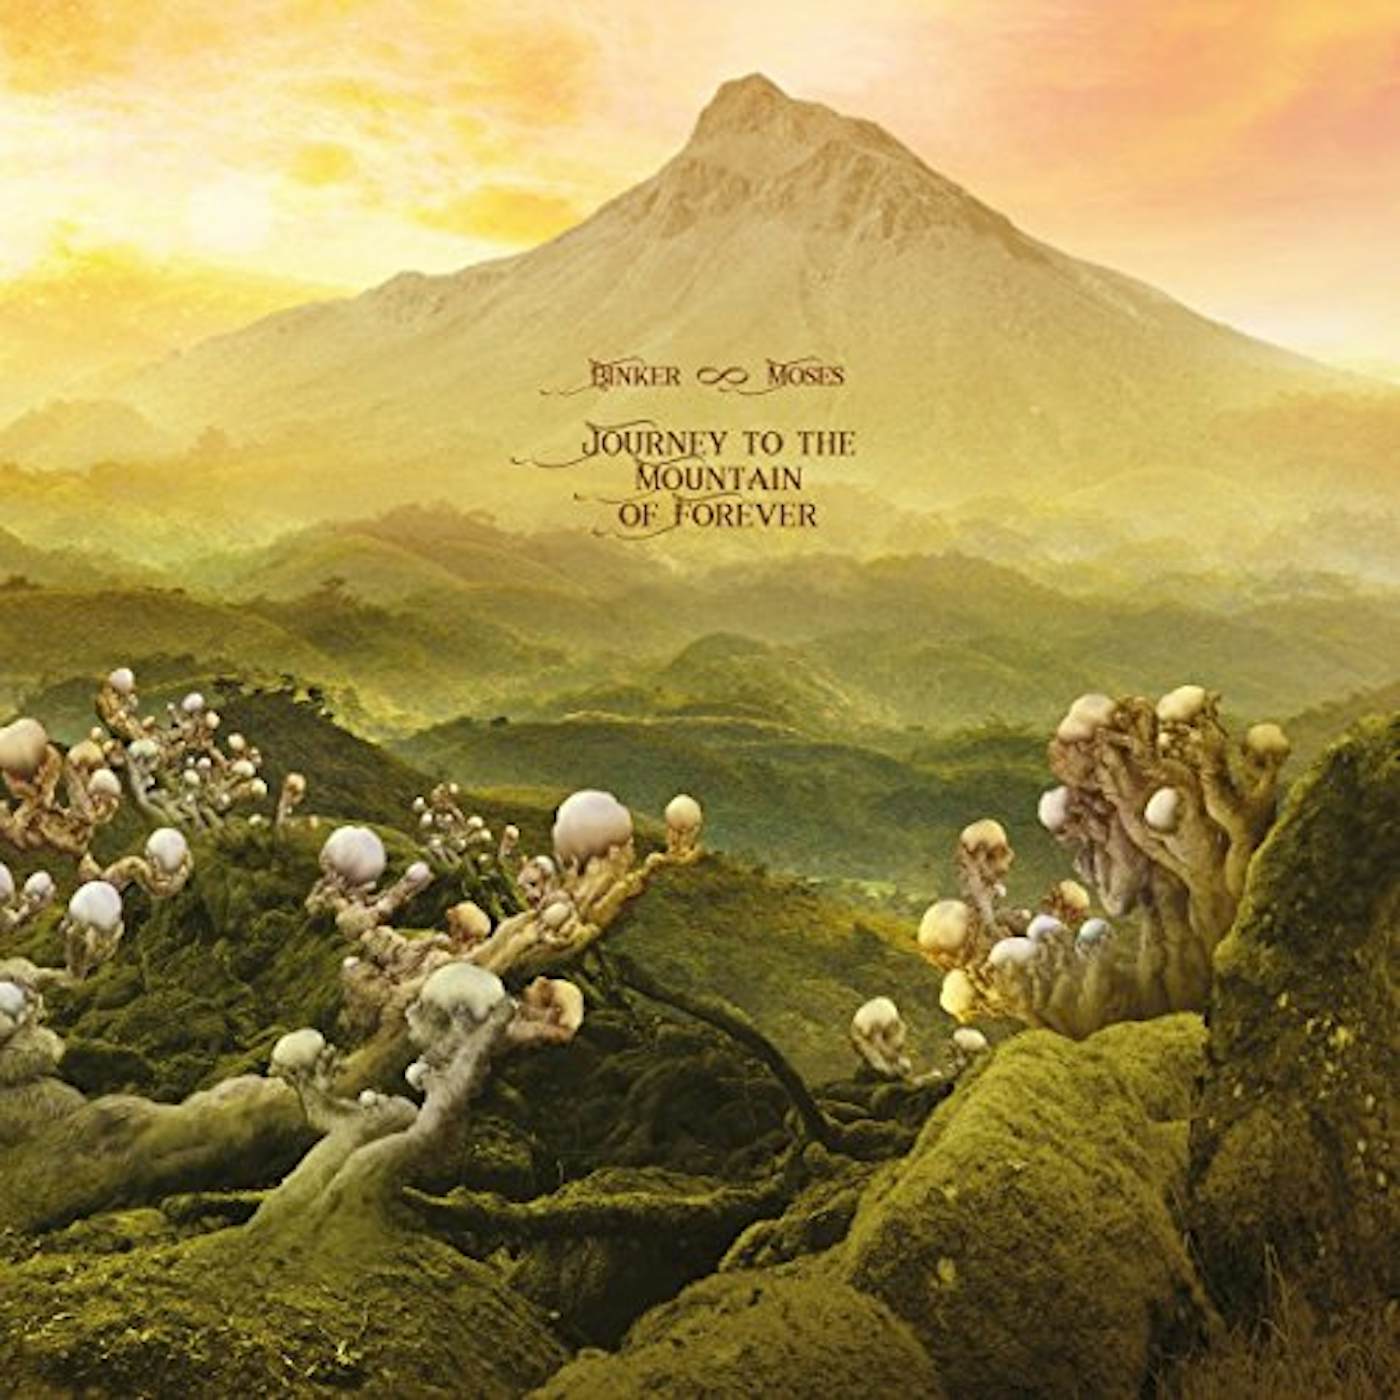 Binker and Moses Journey to the Mountain of Forever Vinyl Record